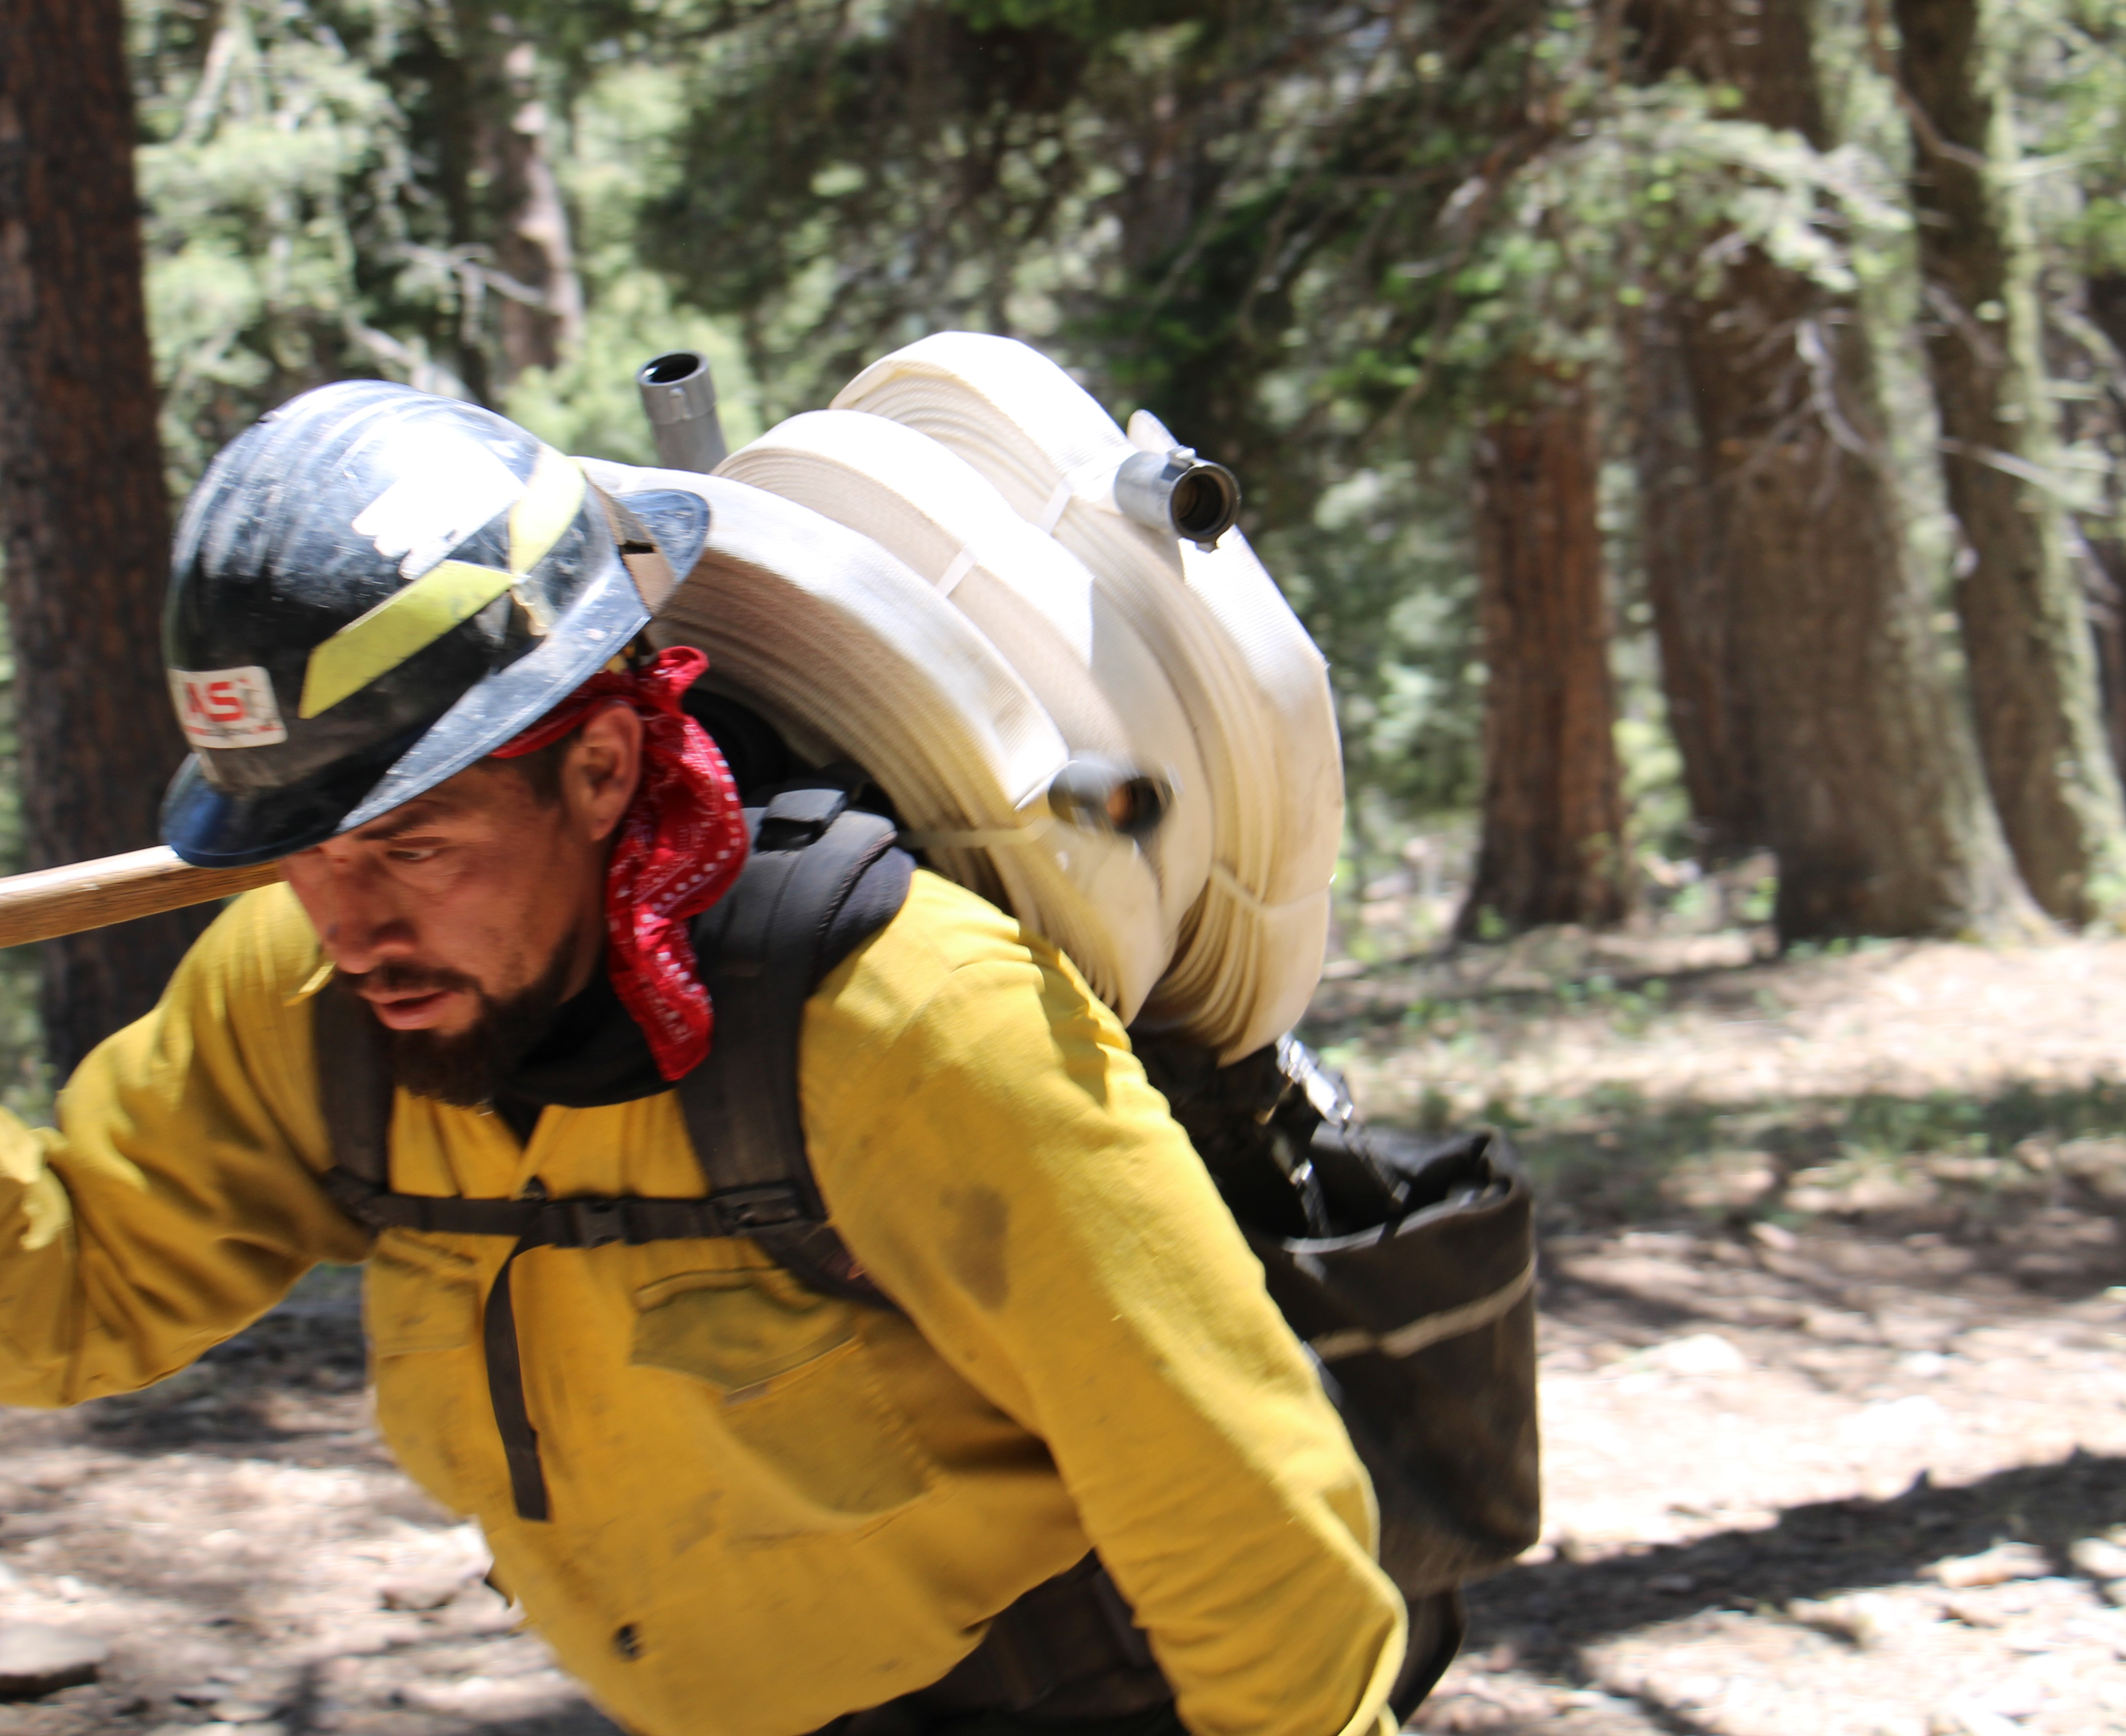 a firefighter carries a roll of hose through the forest